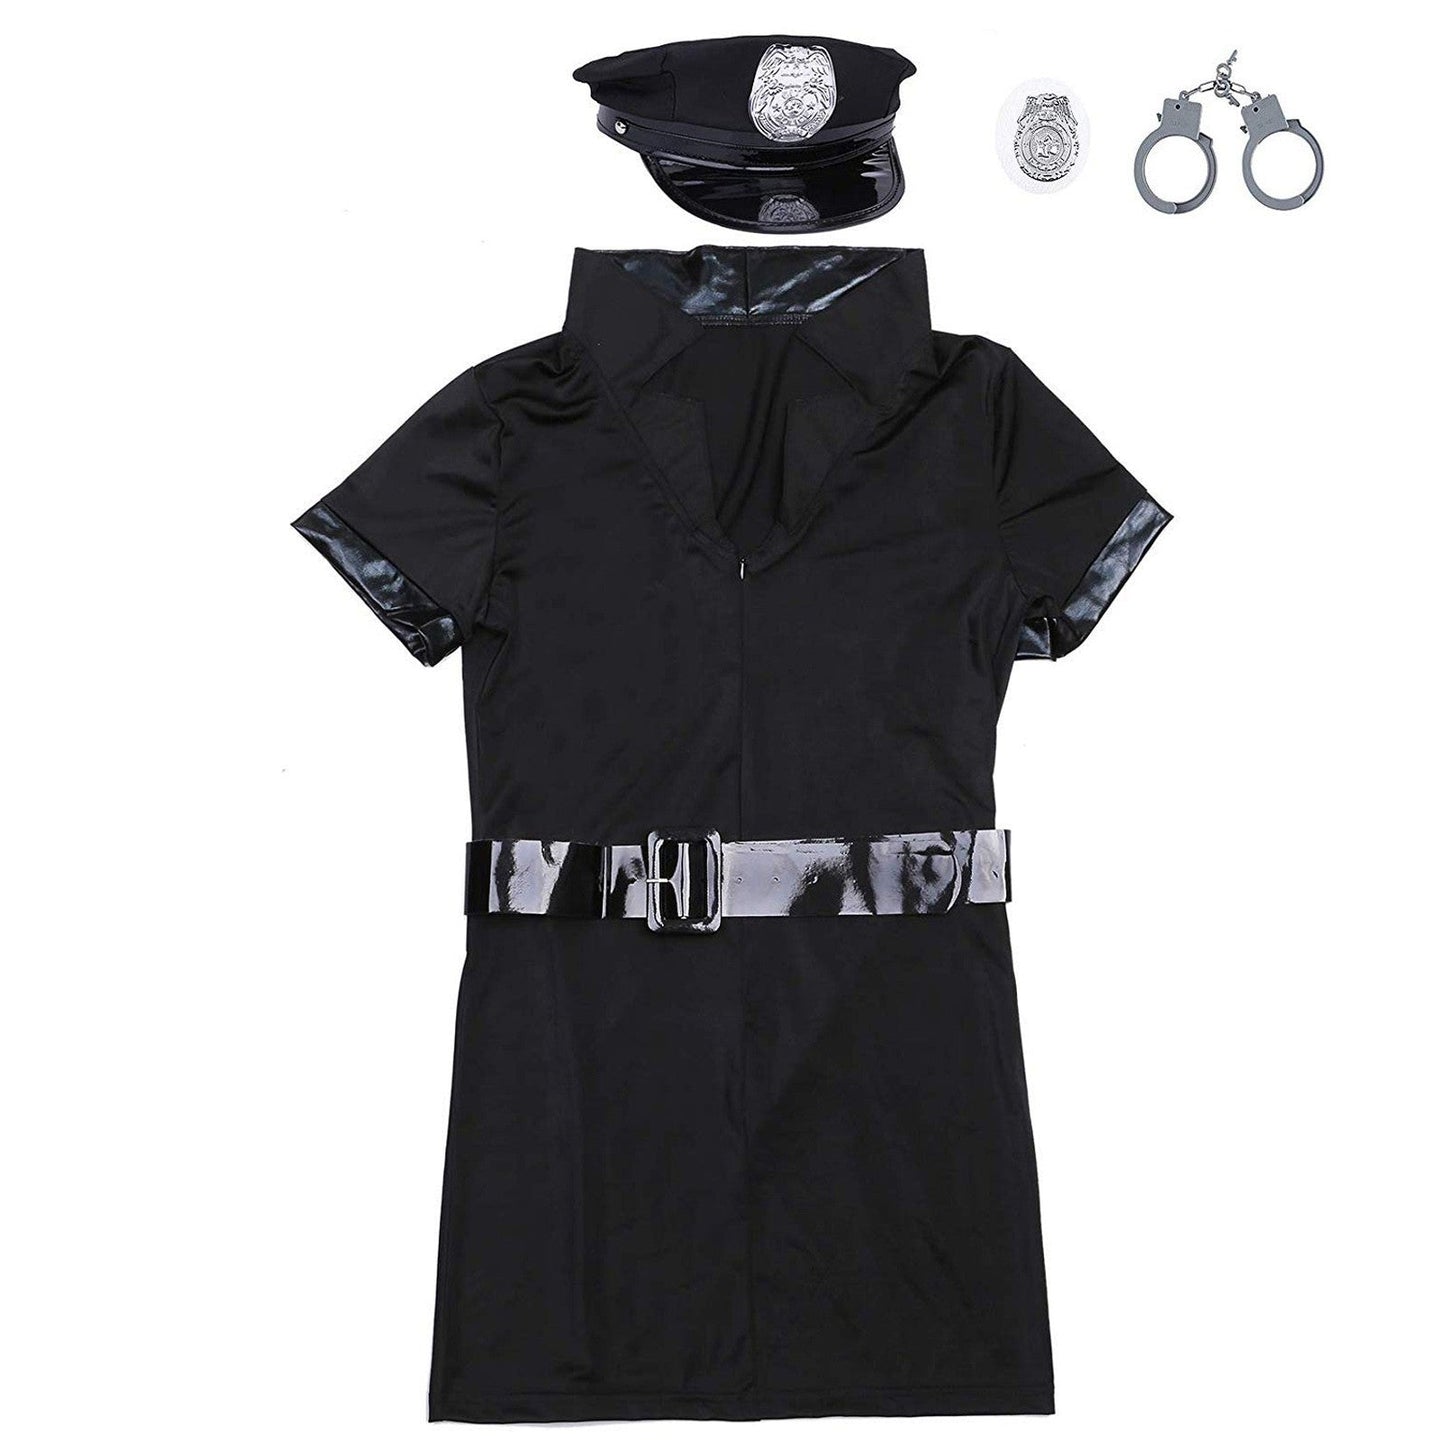 2021 Full body suit Cosplay police uniform Bar costume Women Sexy Costume Adult Cop Uniform Outfit Women Police Cosplay Dress baby magazin 